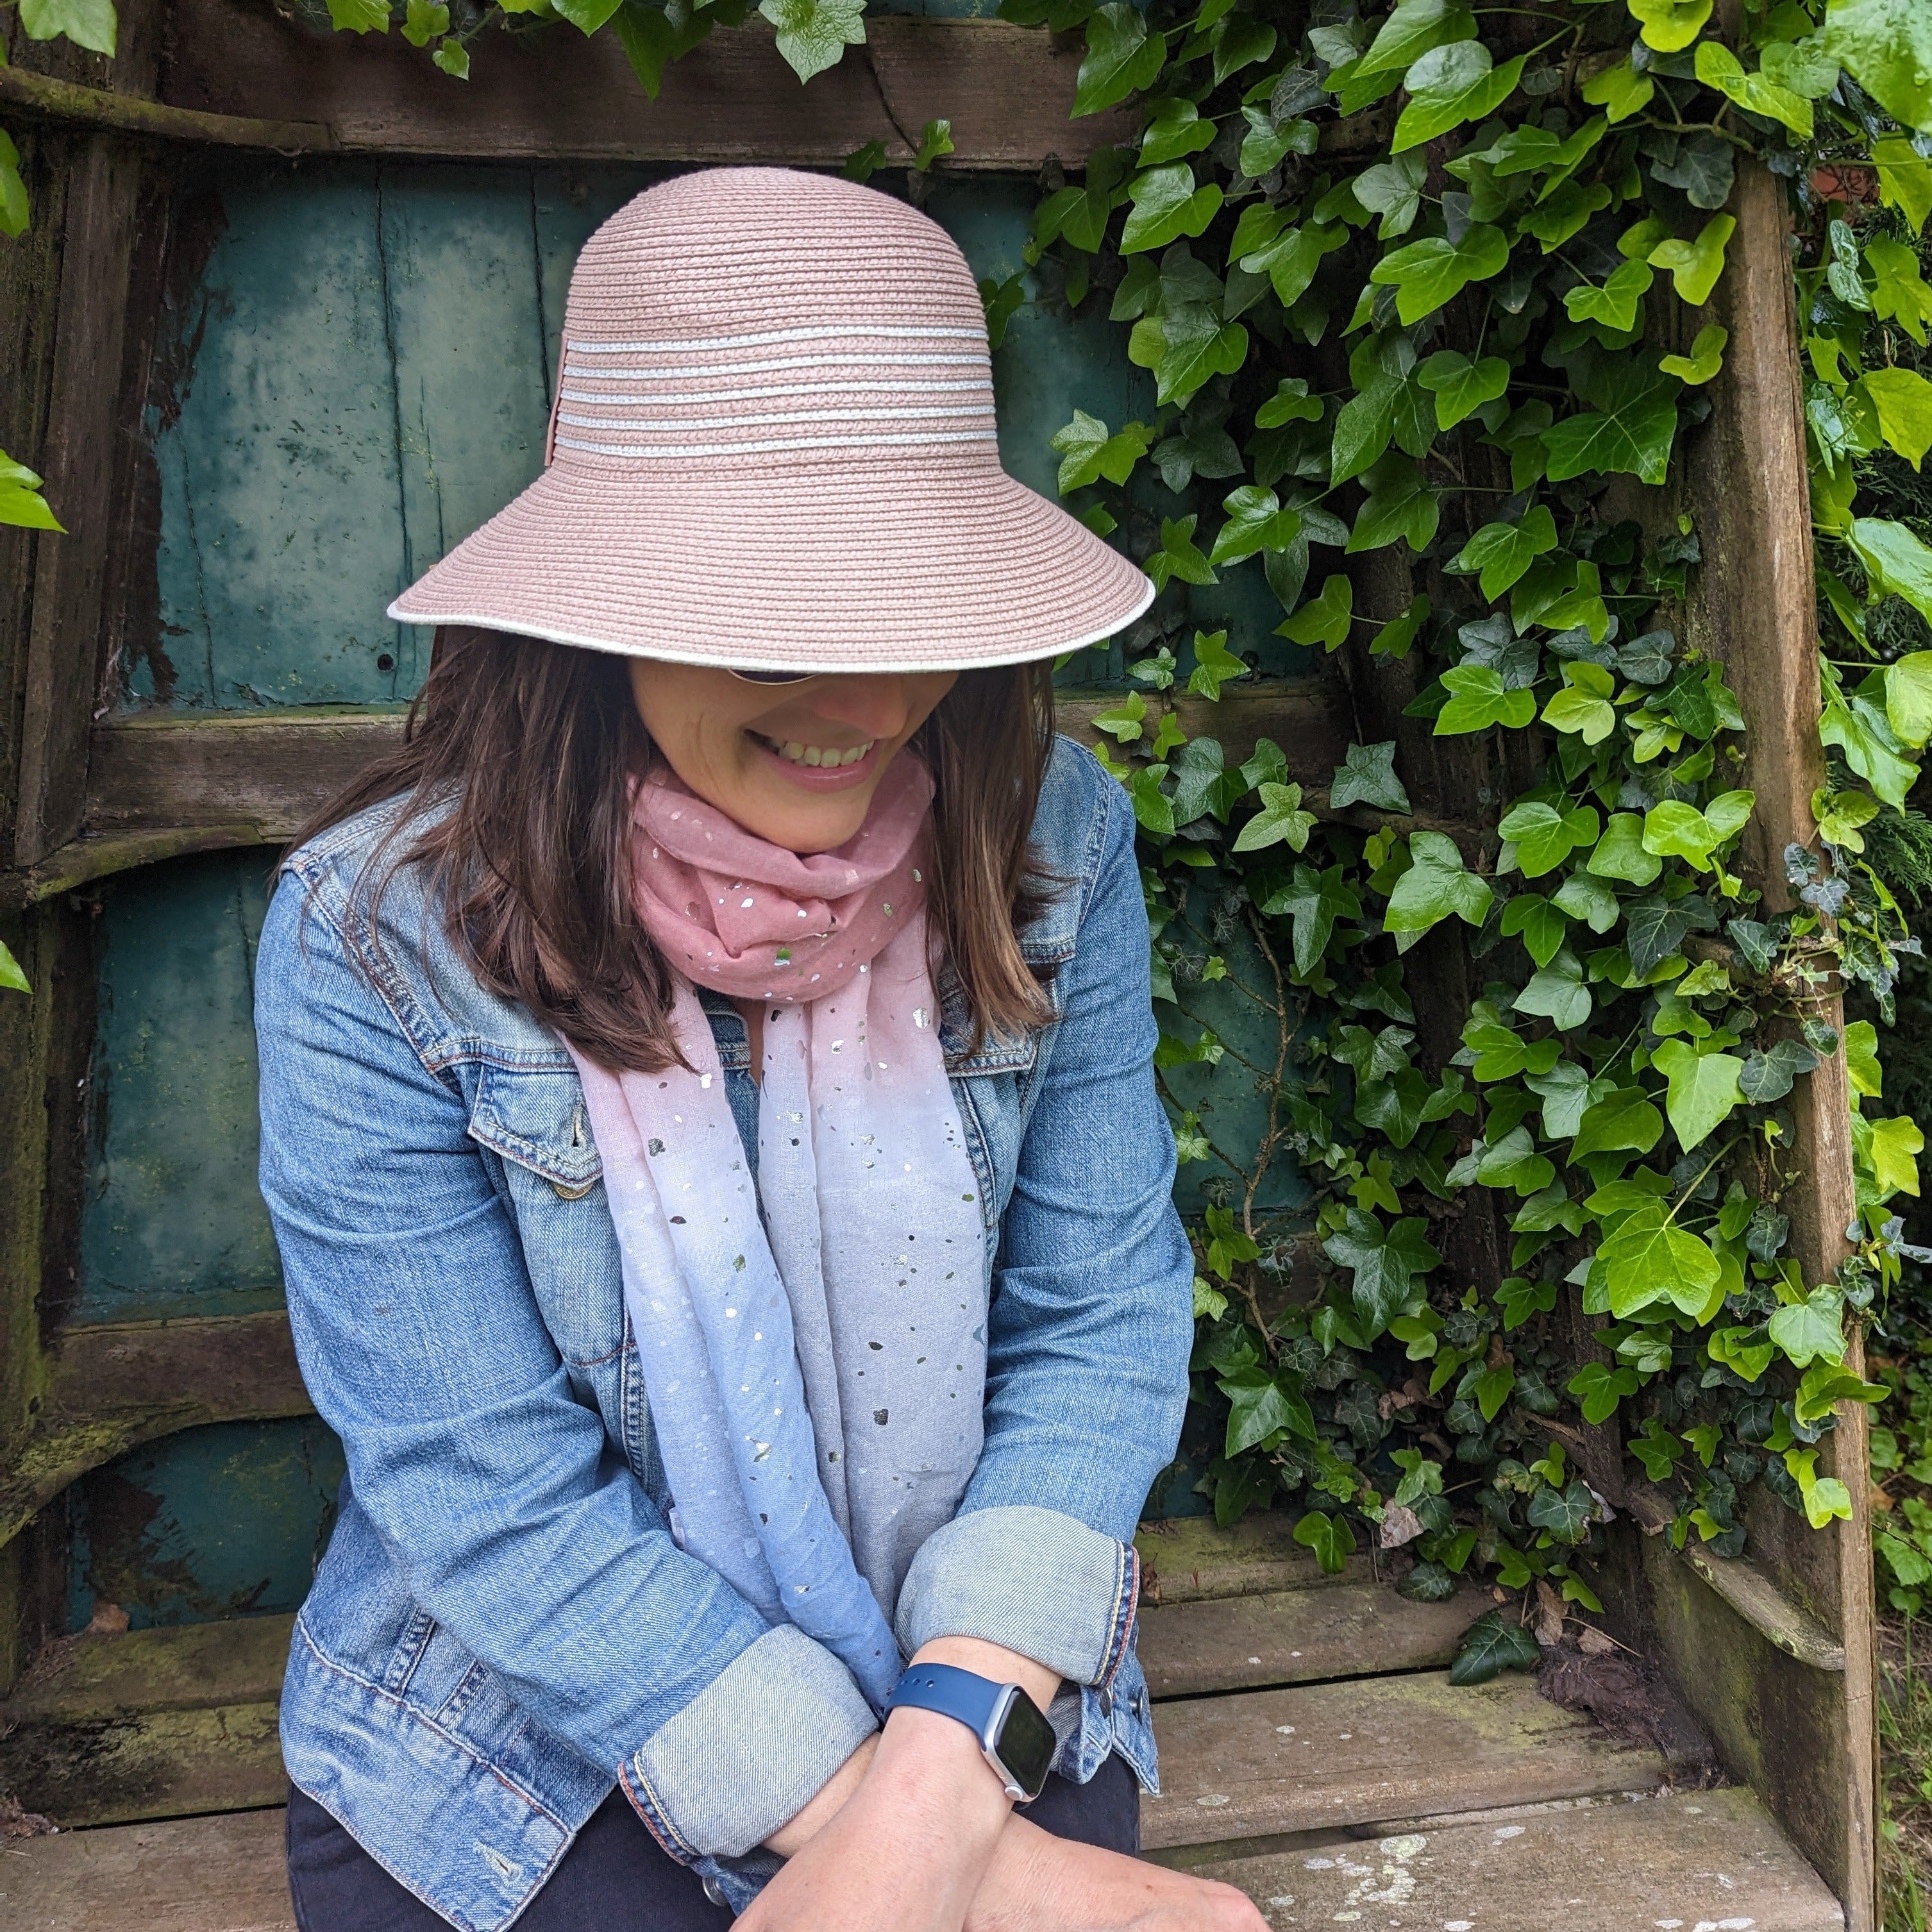 PInk Cloche hat.  Perfect sun protection.  Also great travel hack as it rolls up into a travel bag